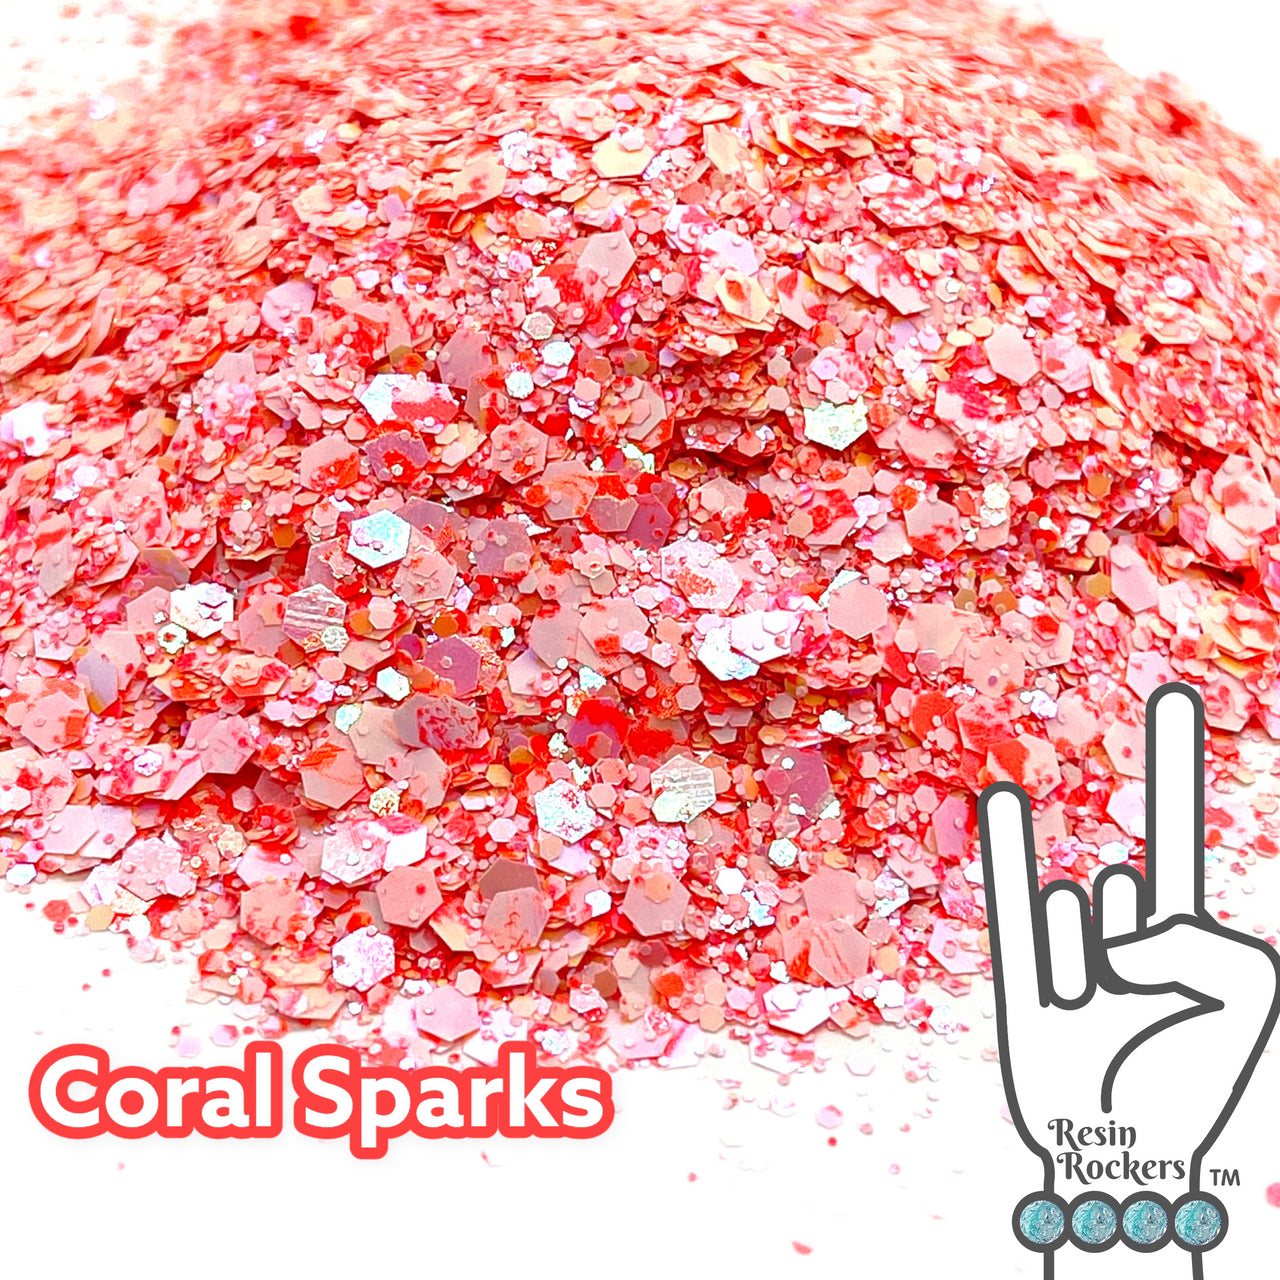 Coral Sparks Holographic and Pearlescent Pixie for Poxy Chunky Glitter Mix